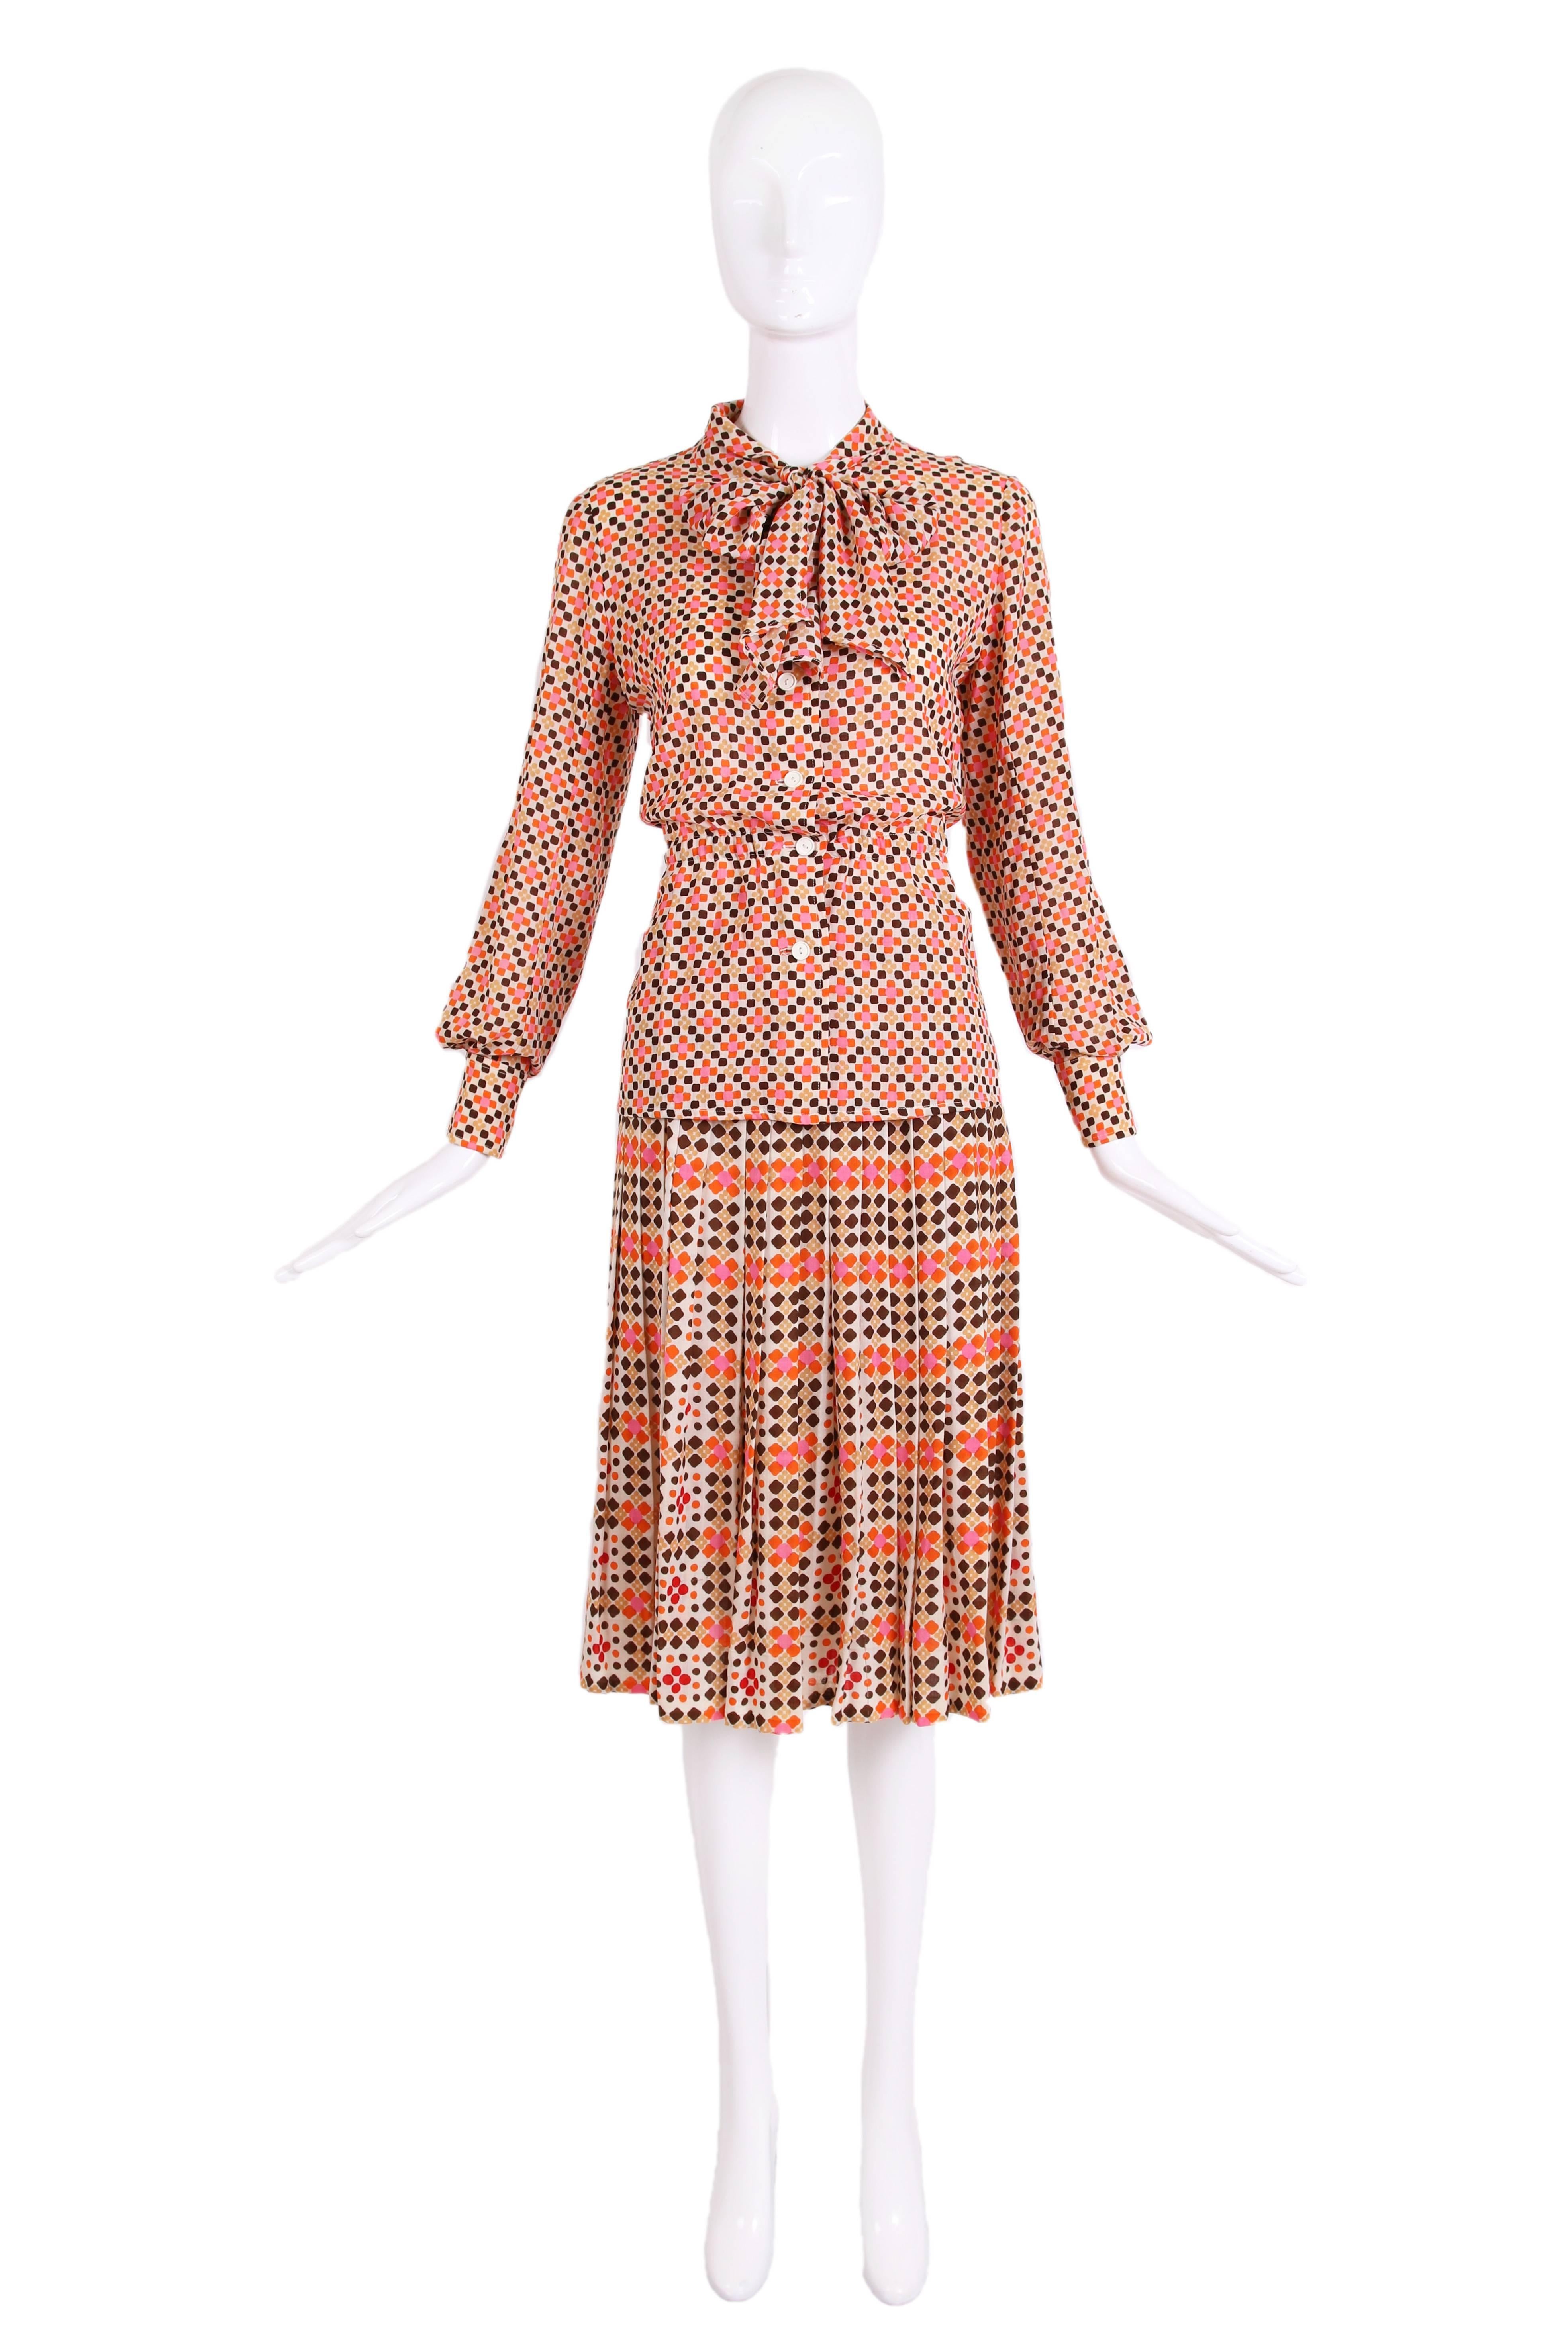 1970's Emanuel Ungaro geometric print two-piece blouse and pleated skirt ensemble in orange, yellow, pink, brown, and cream. Collared button down blouse with neck tie and cinching at the waist. Made from lightweight wool fabric. In excellent